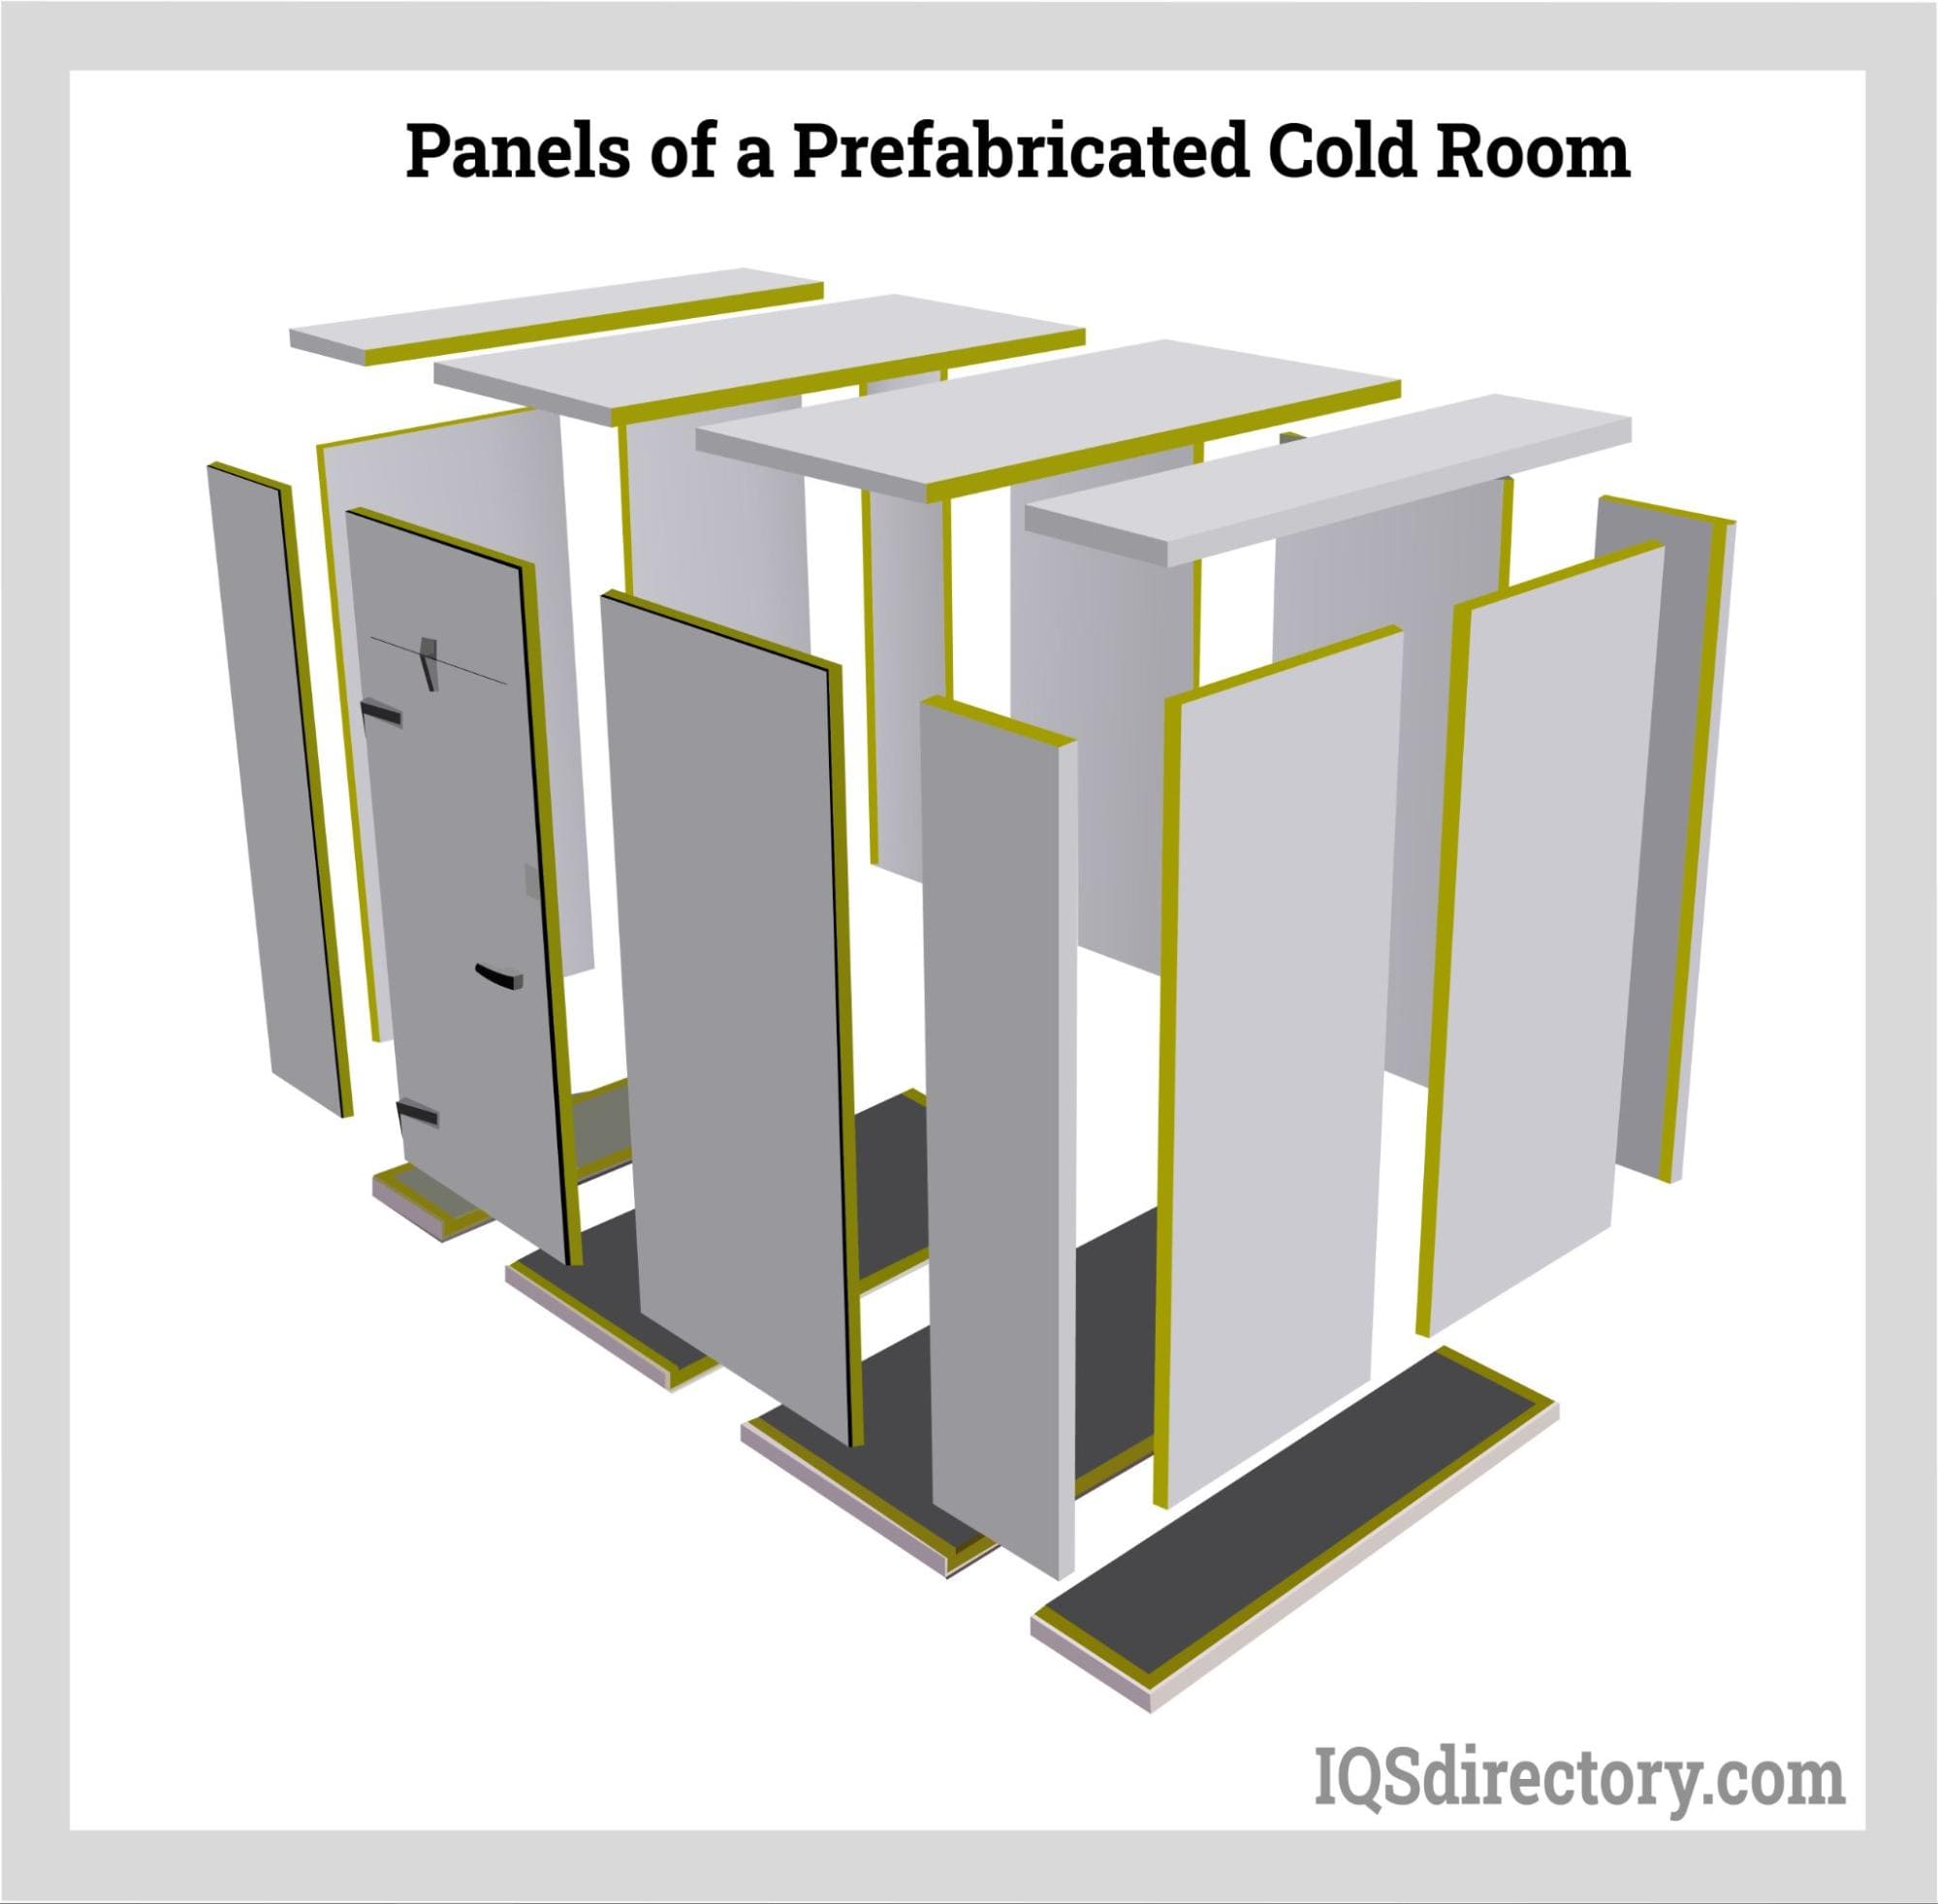 Panels of a Prefabricated Cold Room